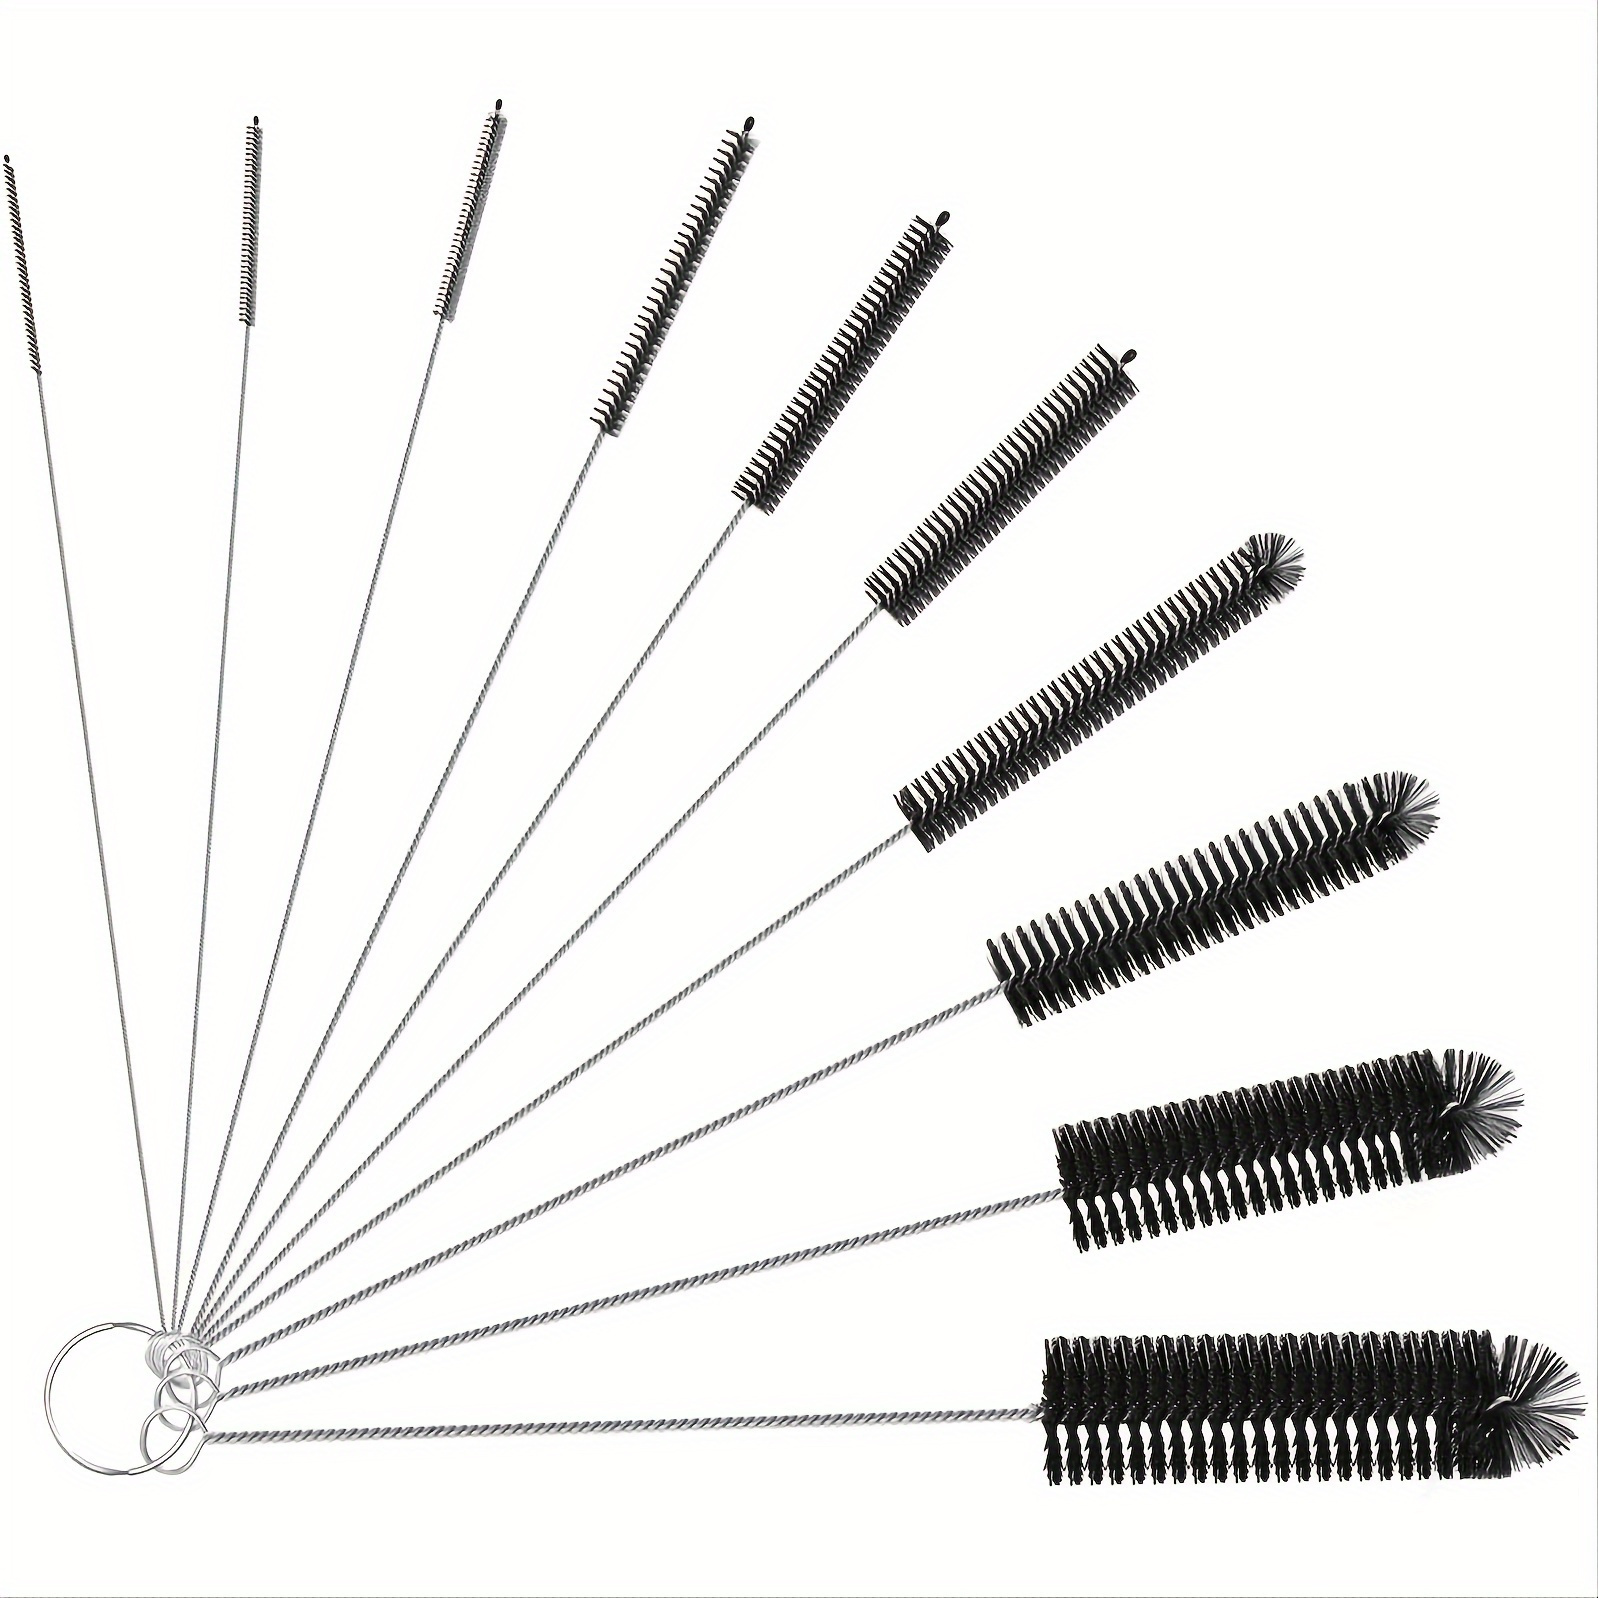 

10-piece Stainless Steel Bottle & Straw Cleaning Brushes - Reusable, Portable, No Power Needed